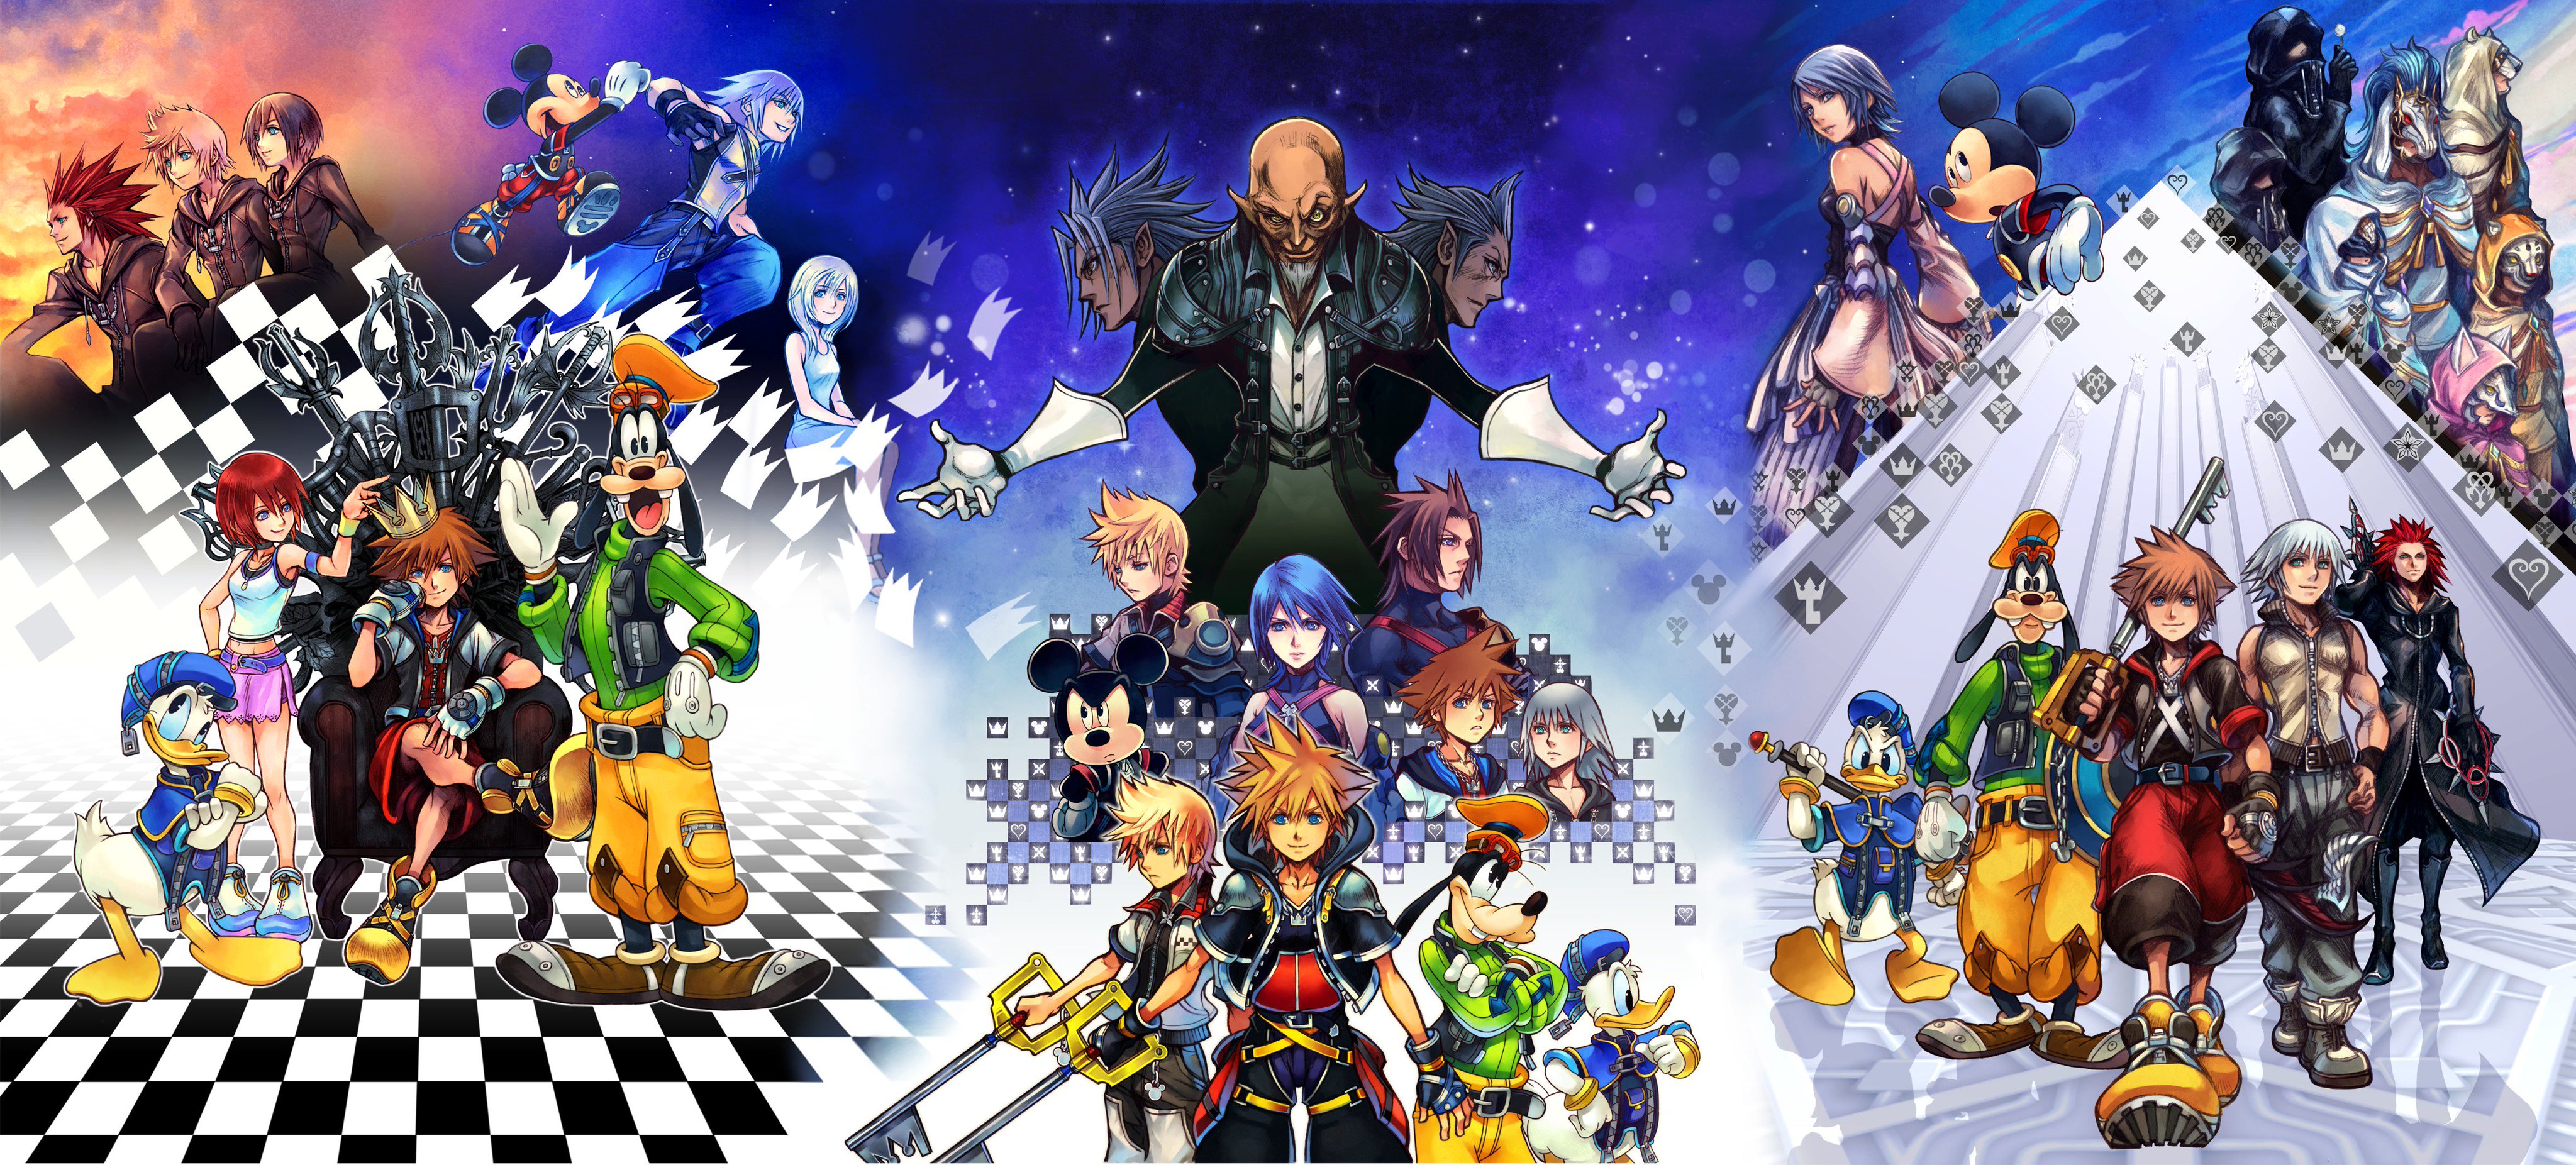 Kingdom Hearts - The Story So Far - Collection 